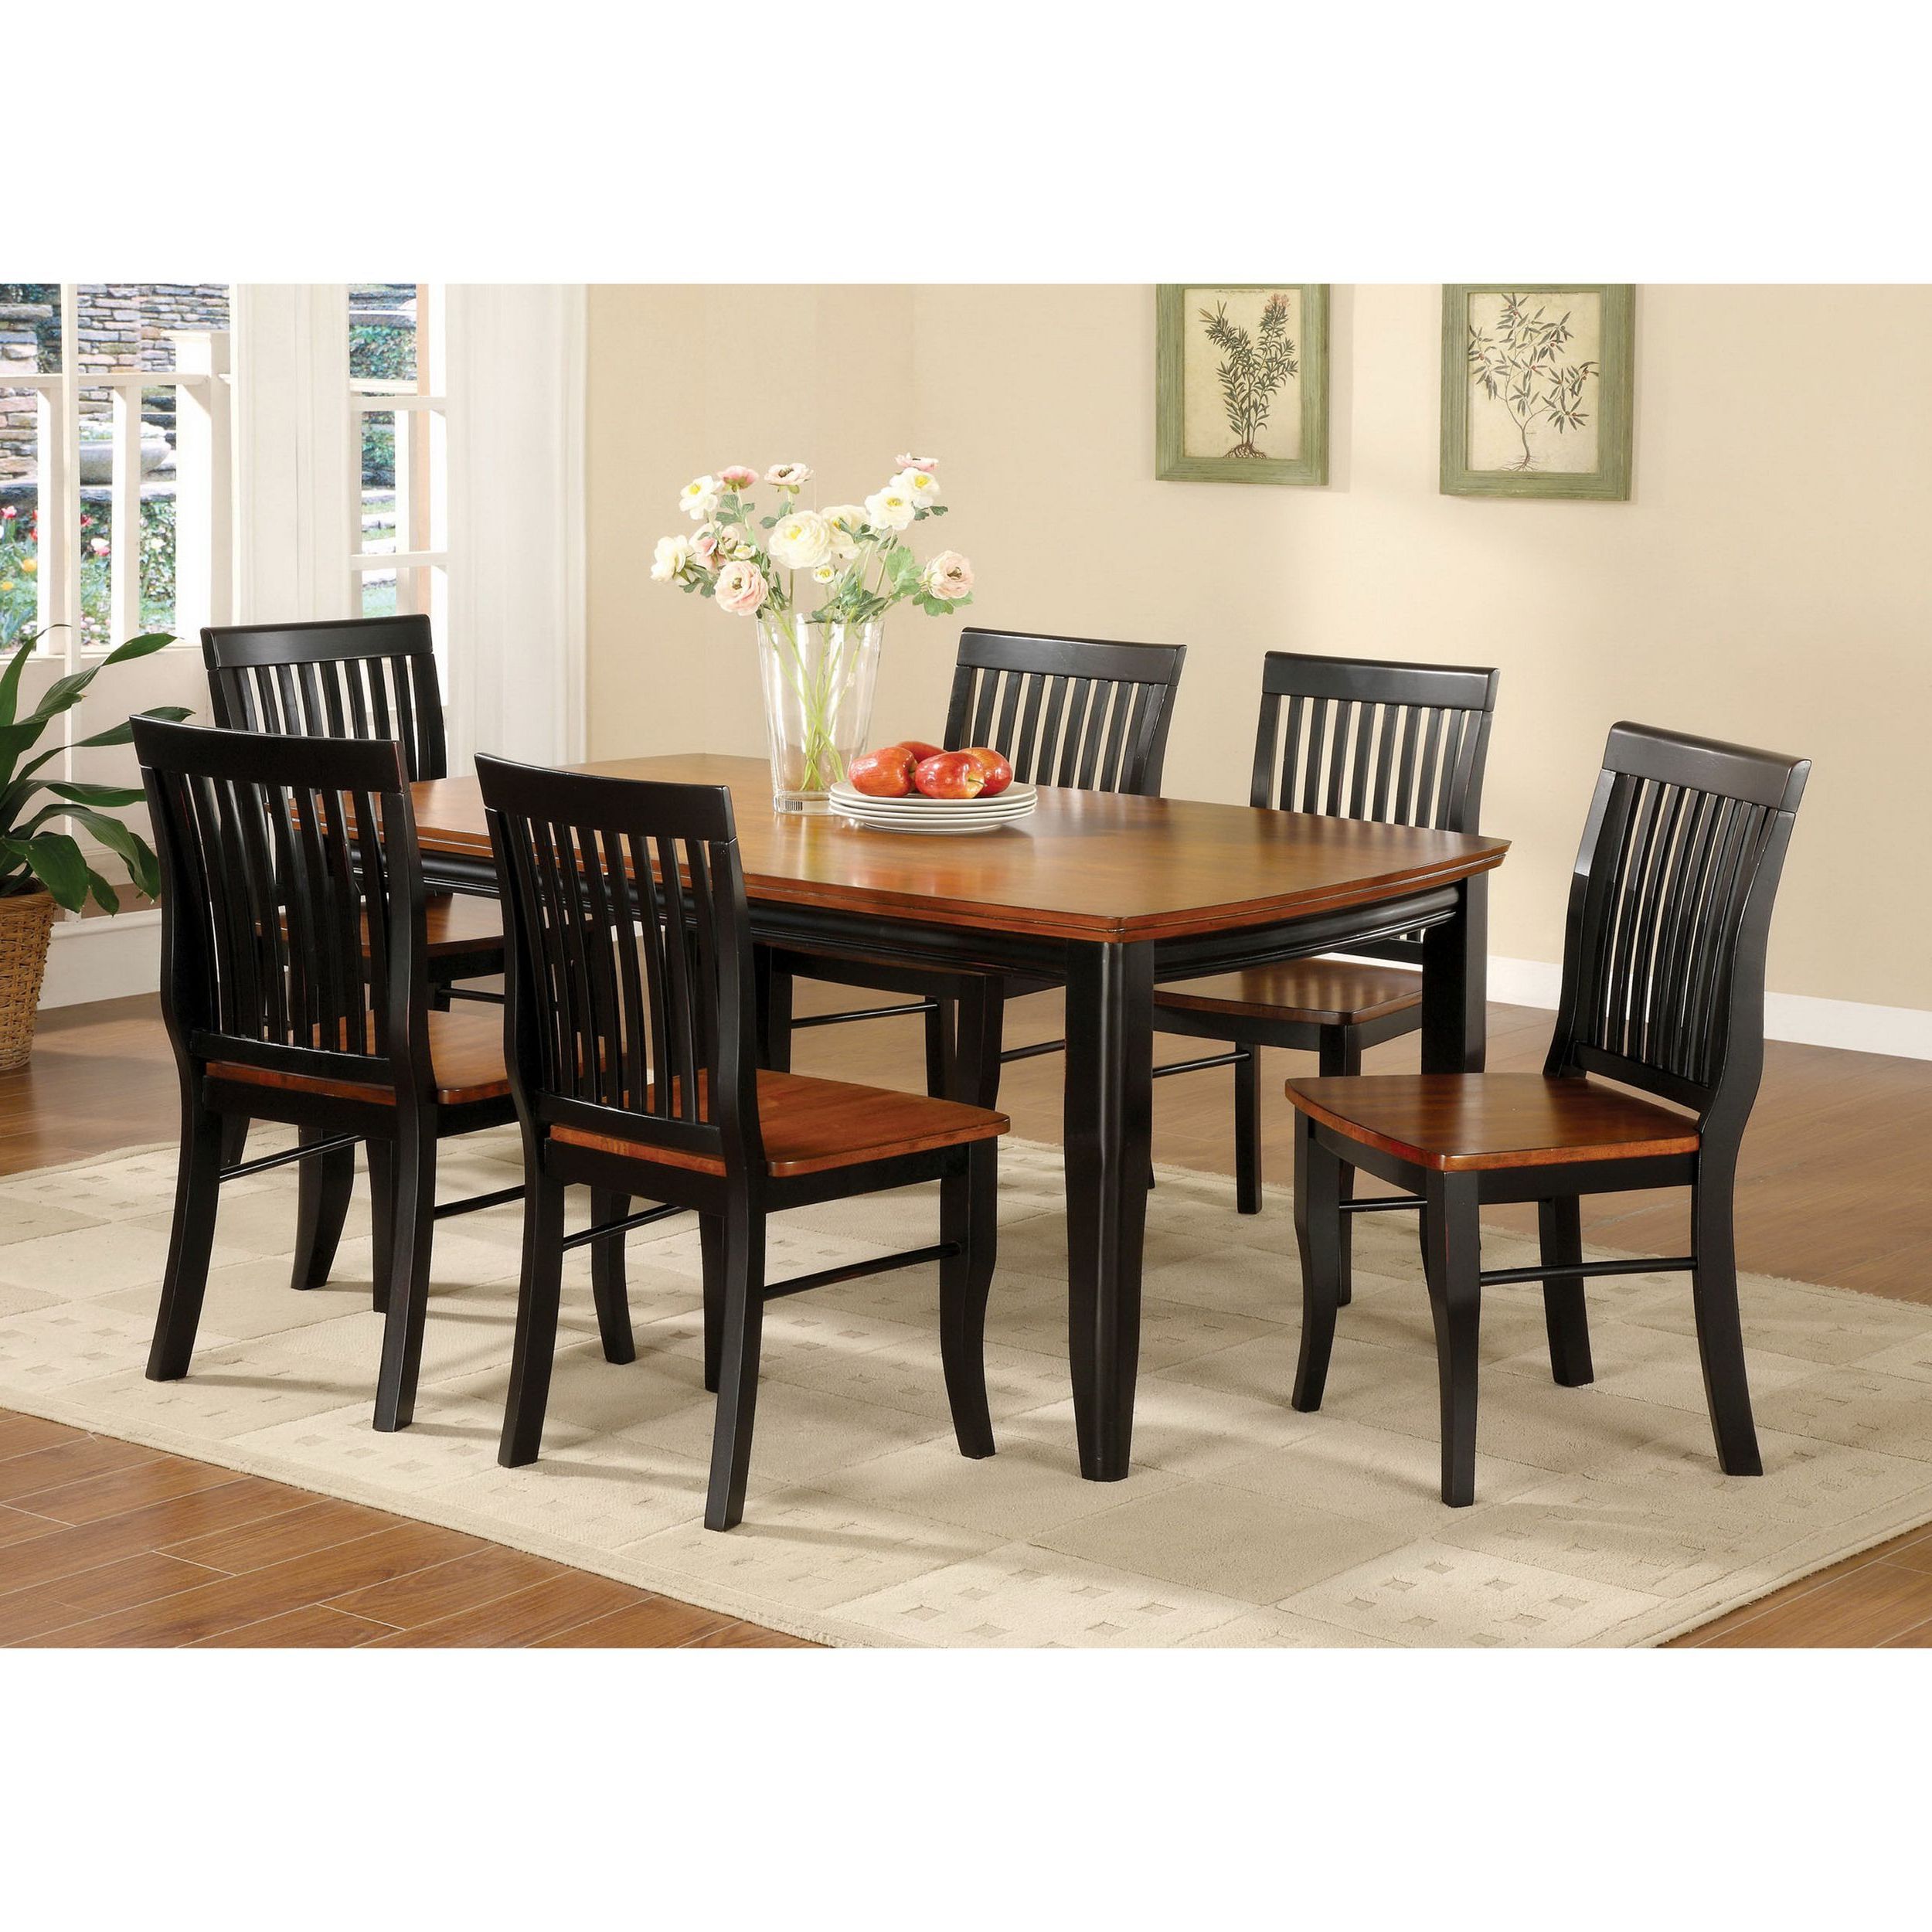 Antique Black Wood Kitchen Dining Tables With 2018 Furniture Of America Burwood Antique Oak/ Black Wood Dining (View 1 of 30)